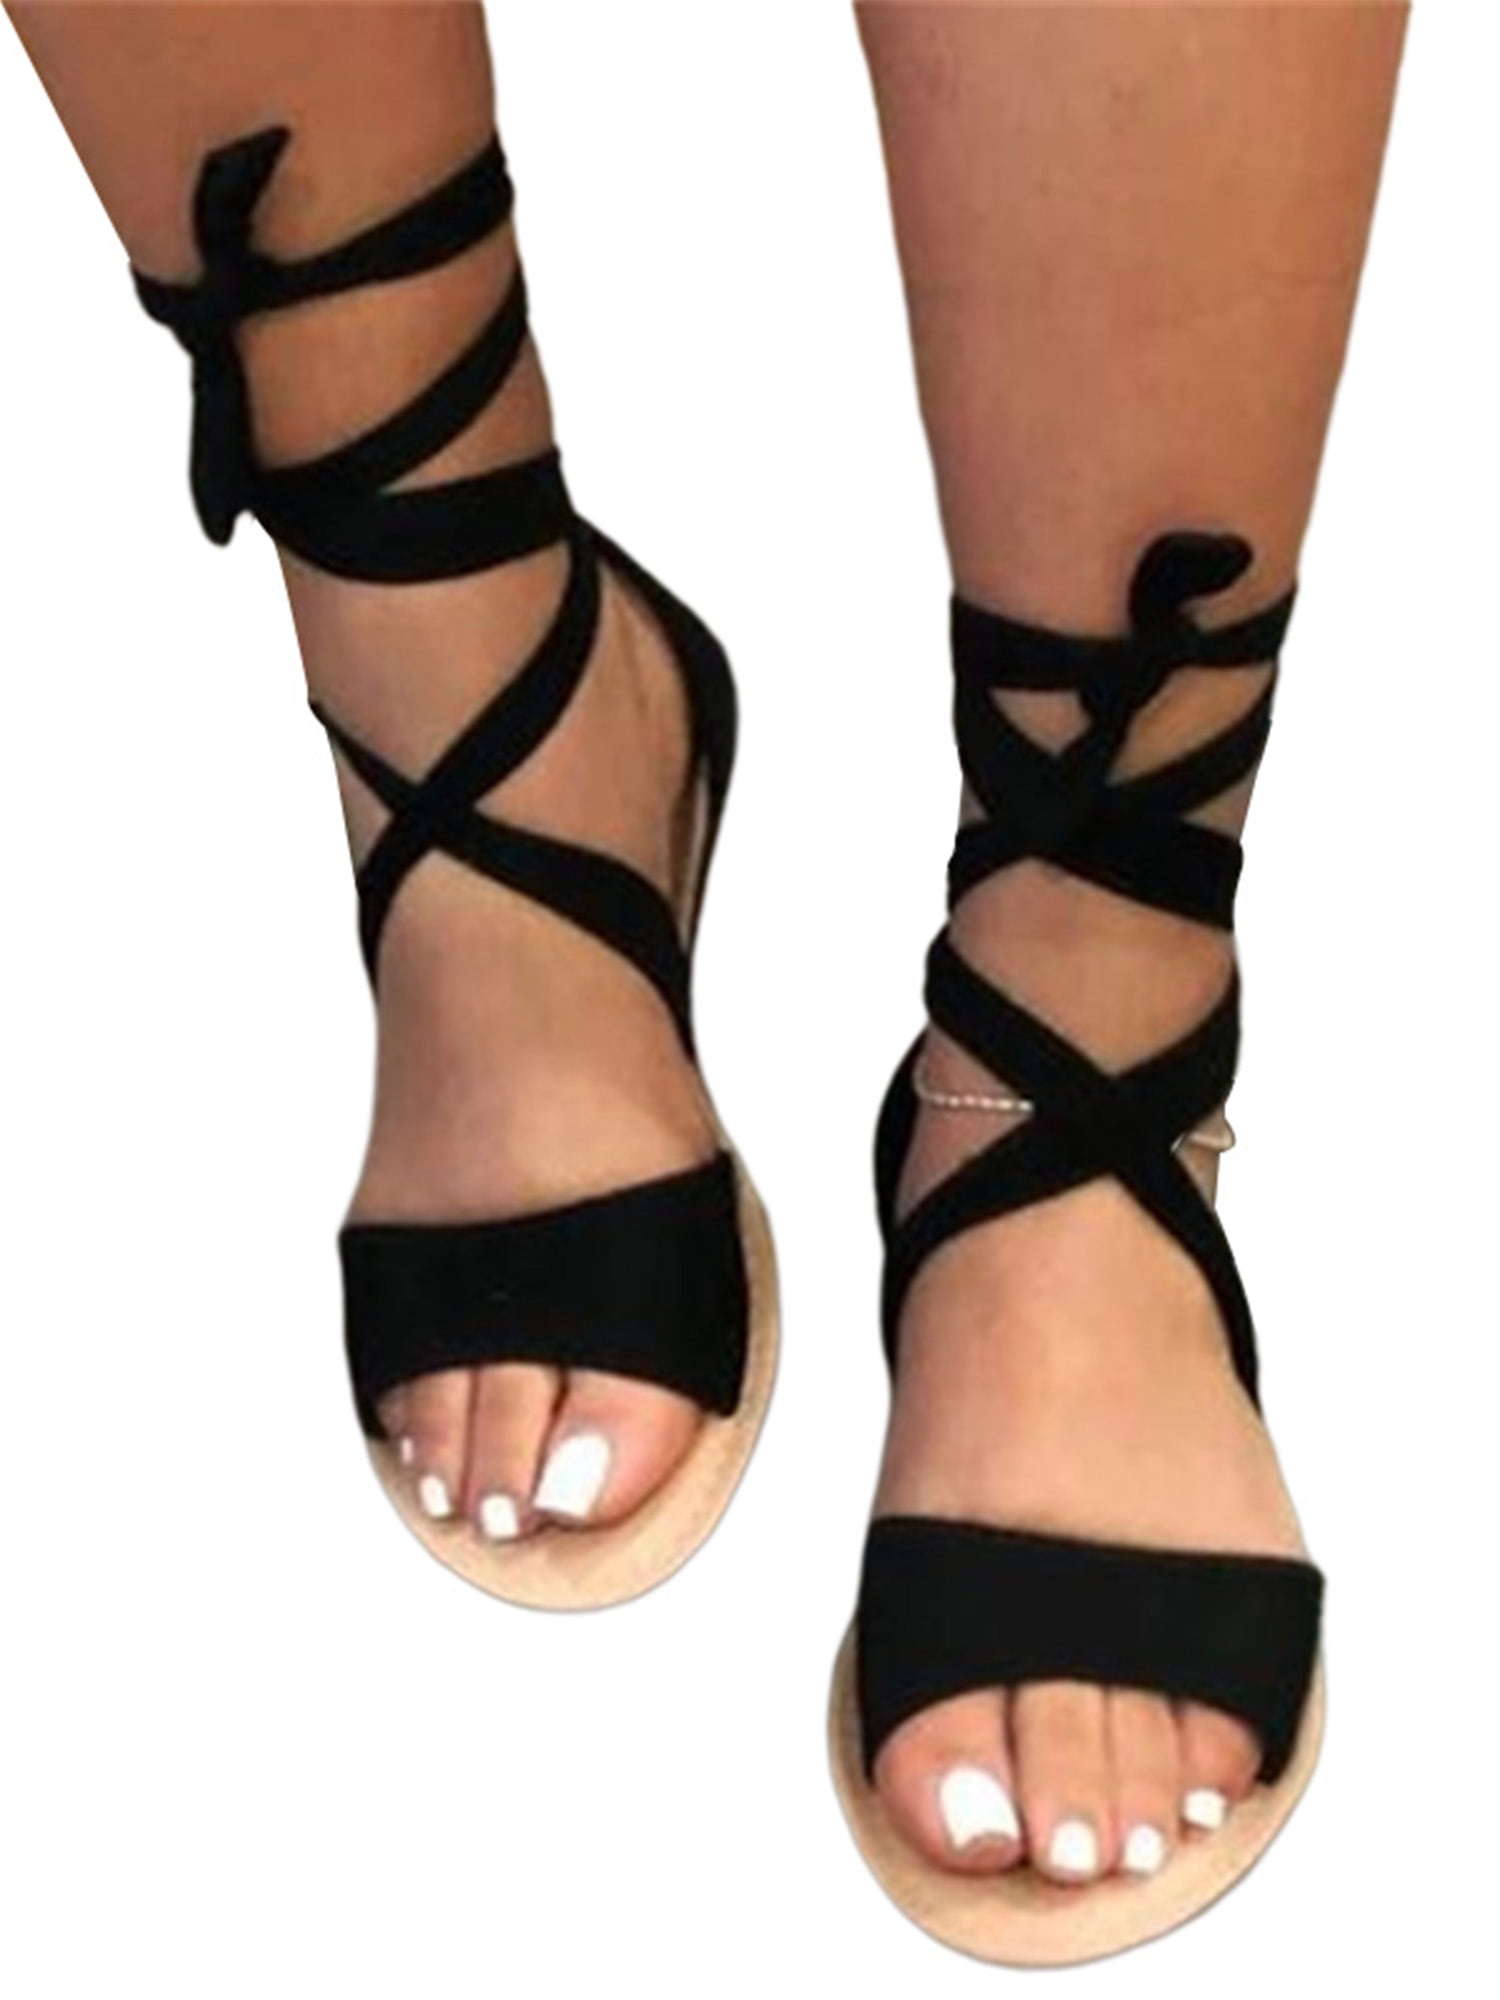 Ladies Gladiator Sandals New Womens Flat Strappy Fancy Summer Beach Shoes Size 